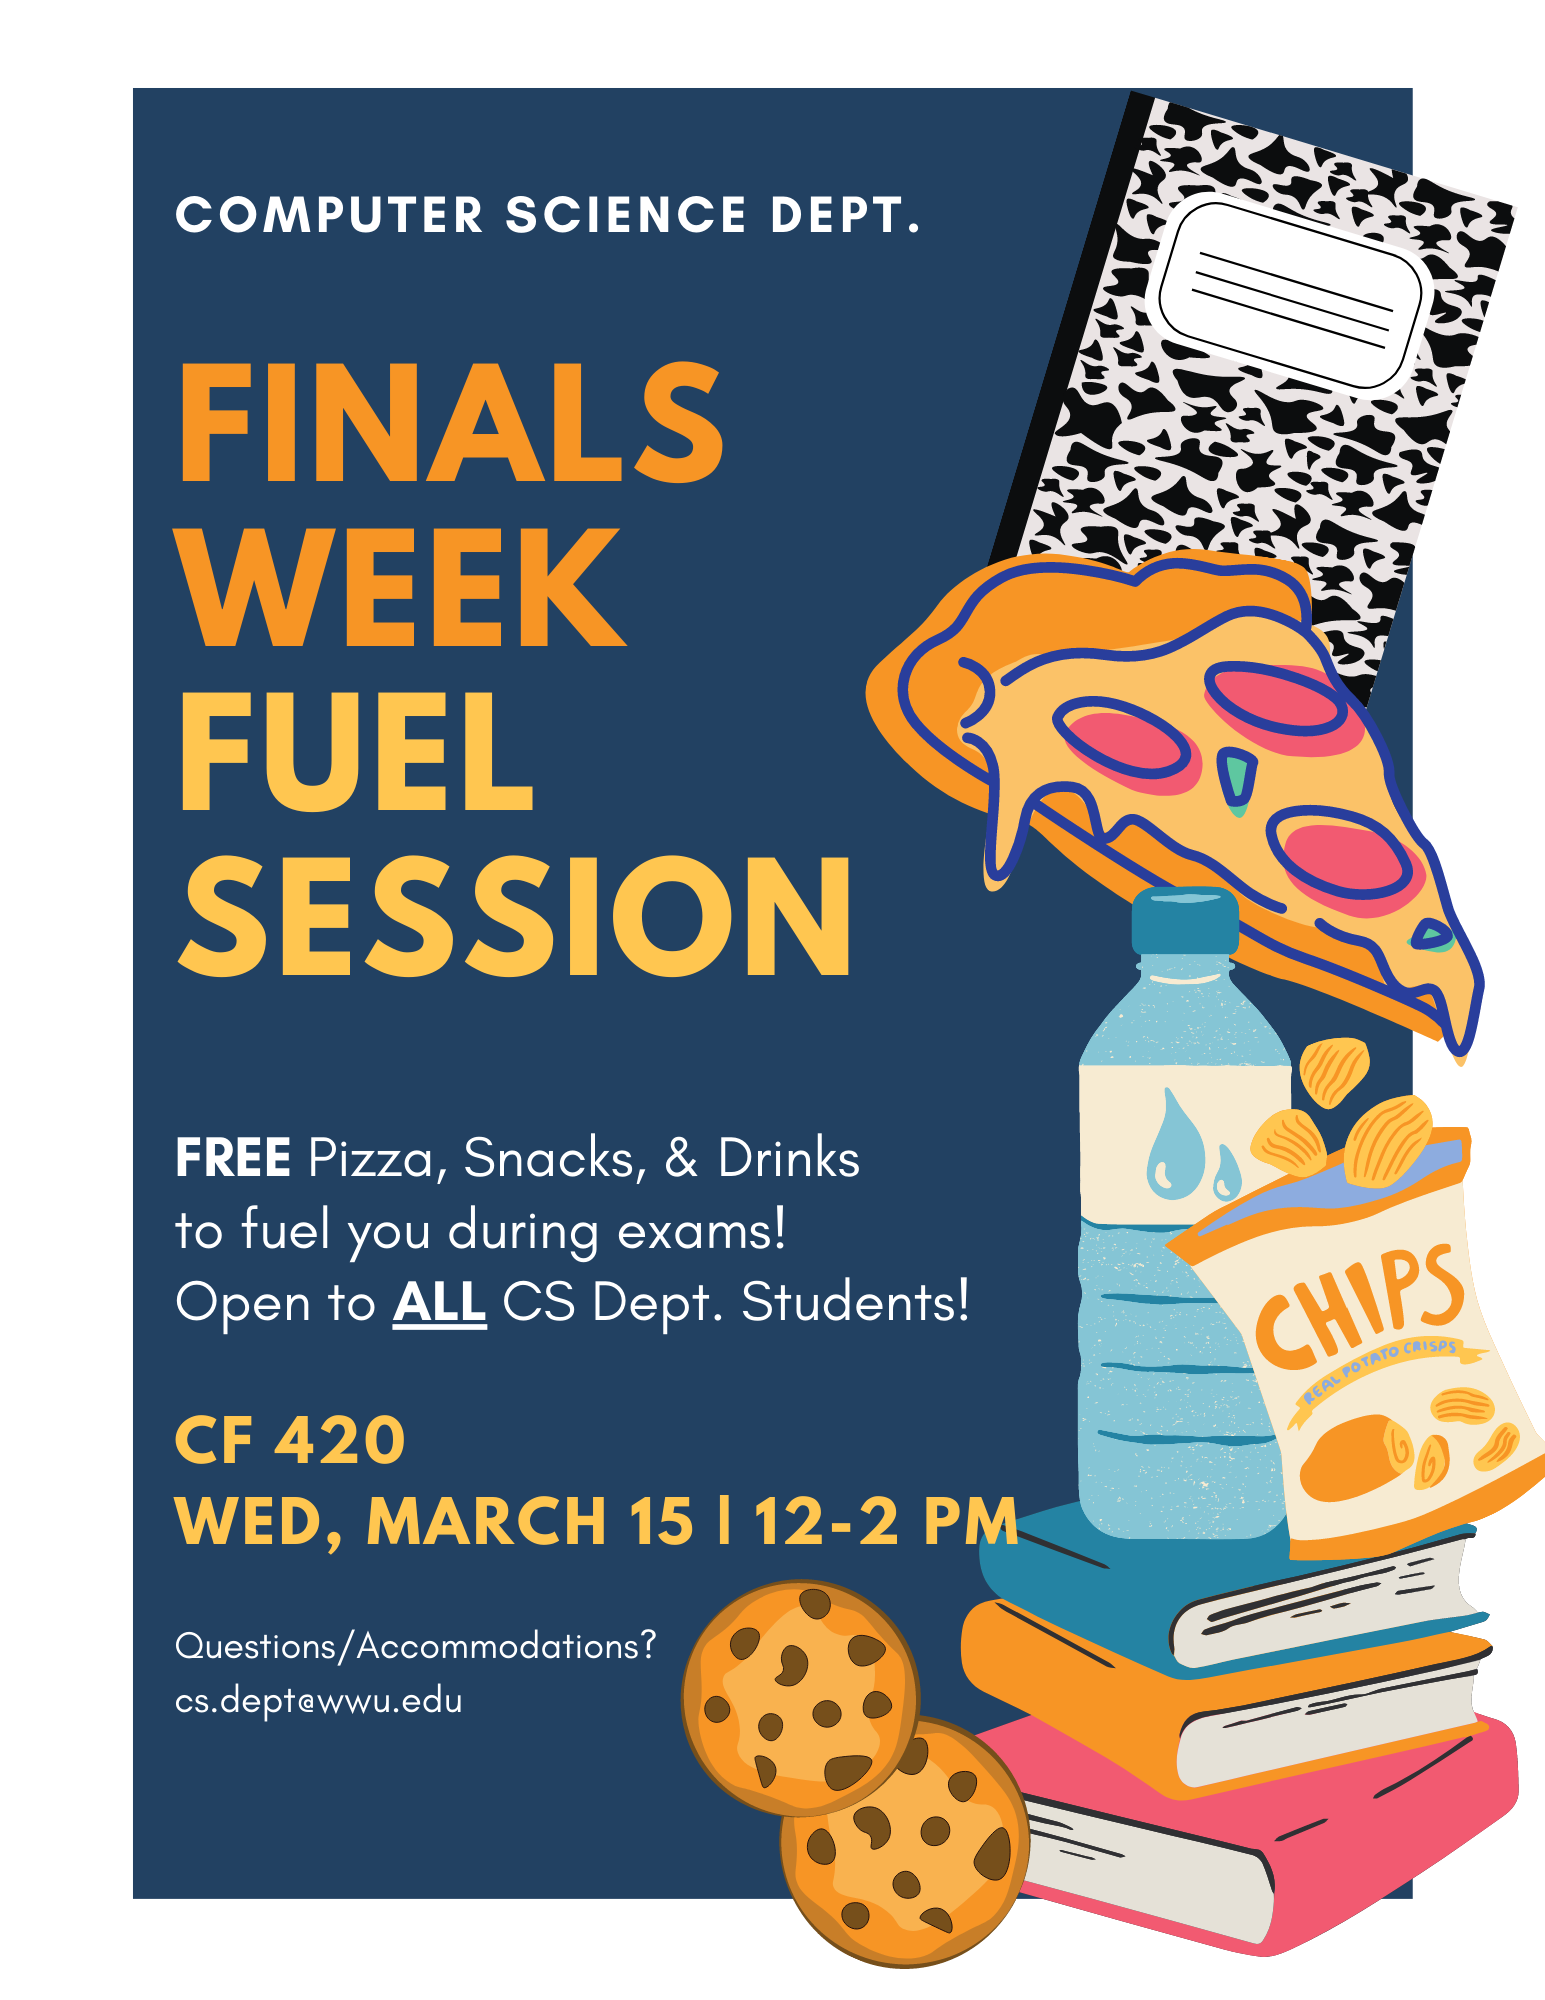 Finals Week Fuel Session - Winter 2023! Take a break and fuel up for finals with FREE pizza and snacks. Wednesday 3/15, noon to 2 PM in CF 420.